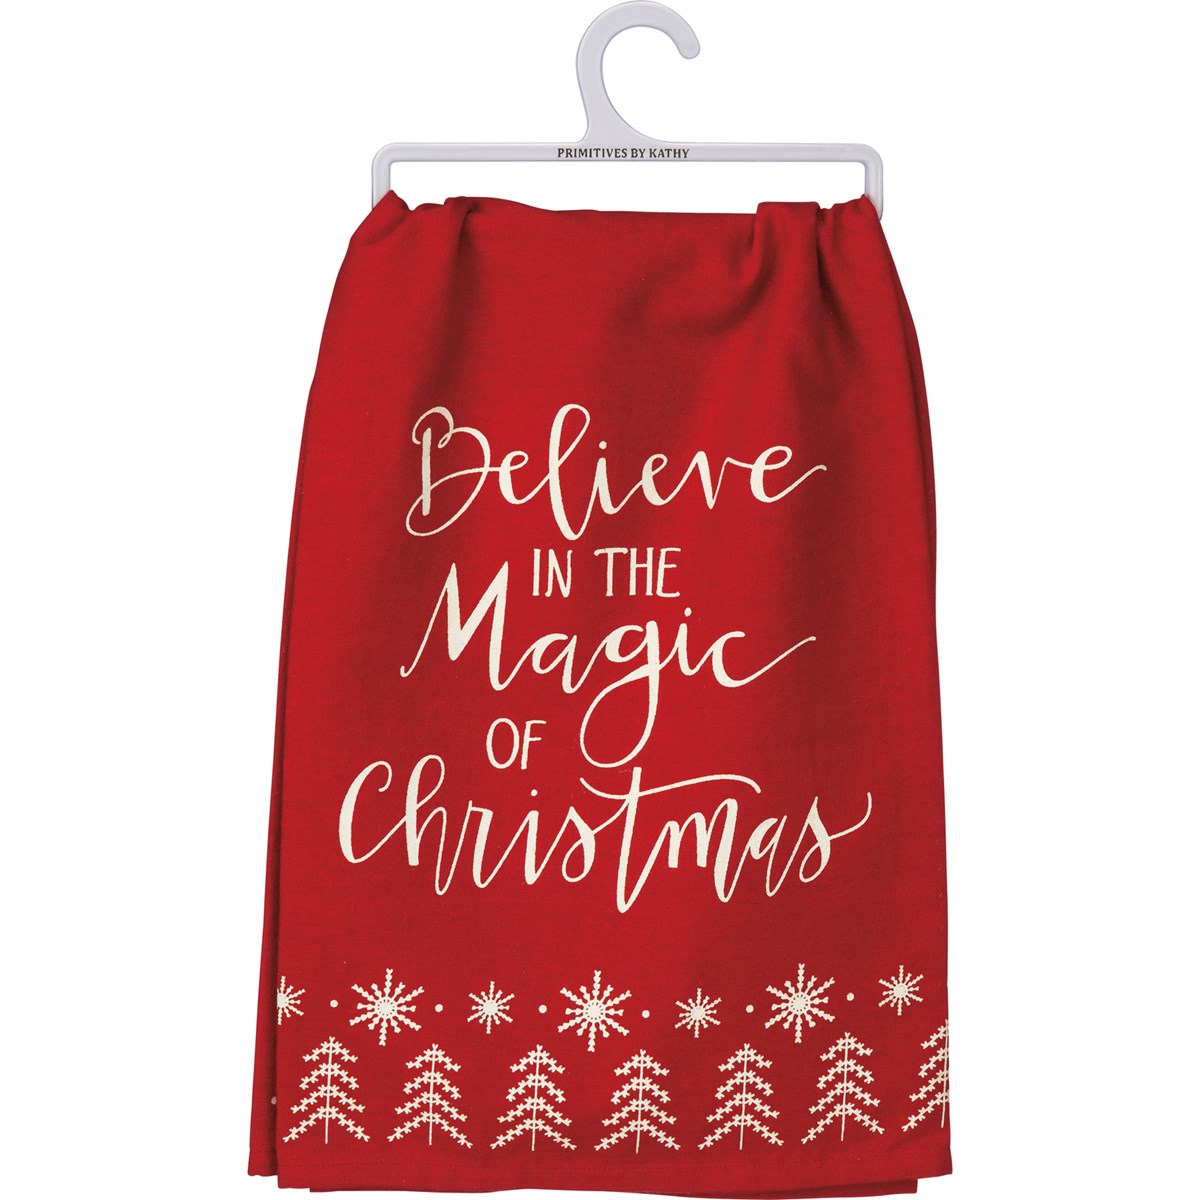 Kitchen Towel - Believe In The Magic Of Christmas - 28" x 28" - Cotton